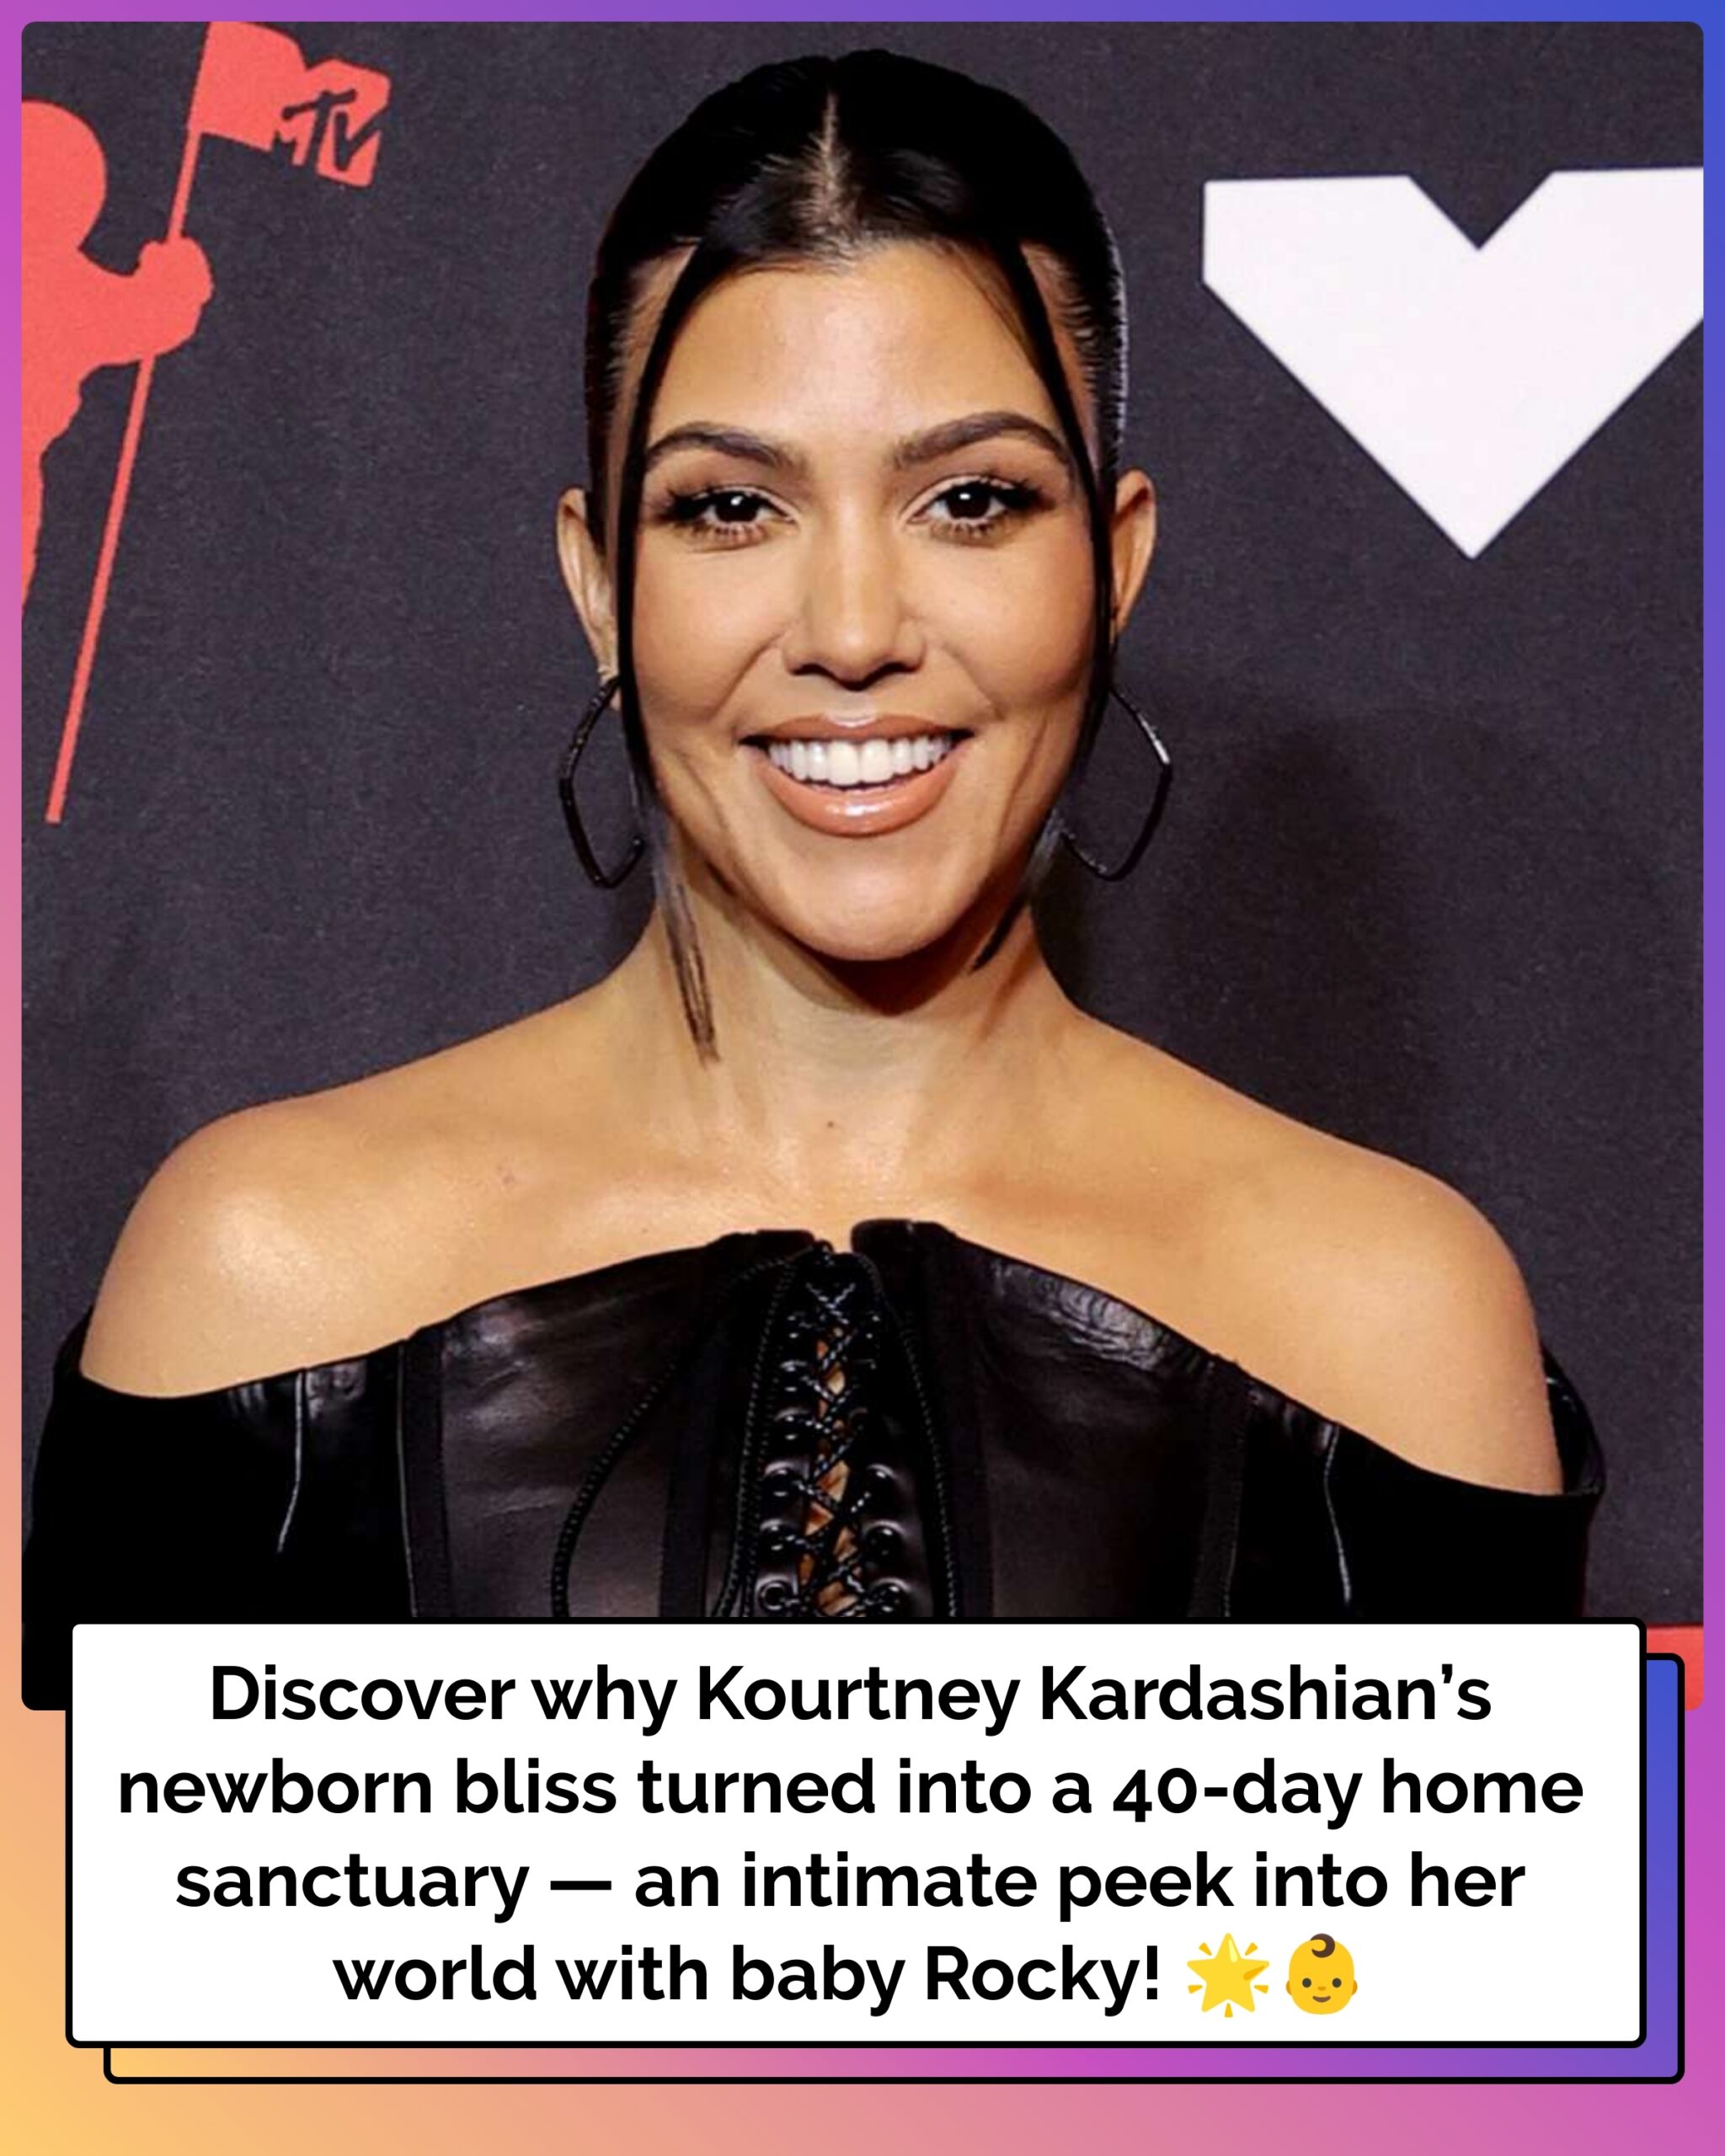 Kourtney Kardashian Explains Why She Stayed Home for 40 Days After Welcoming Baby Rocky